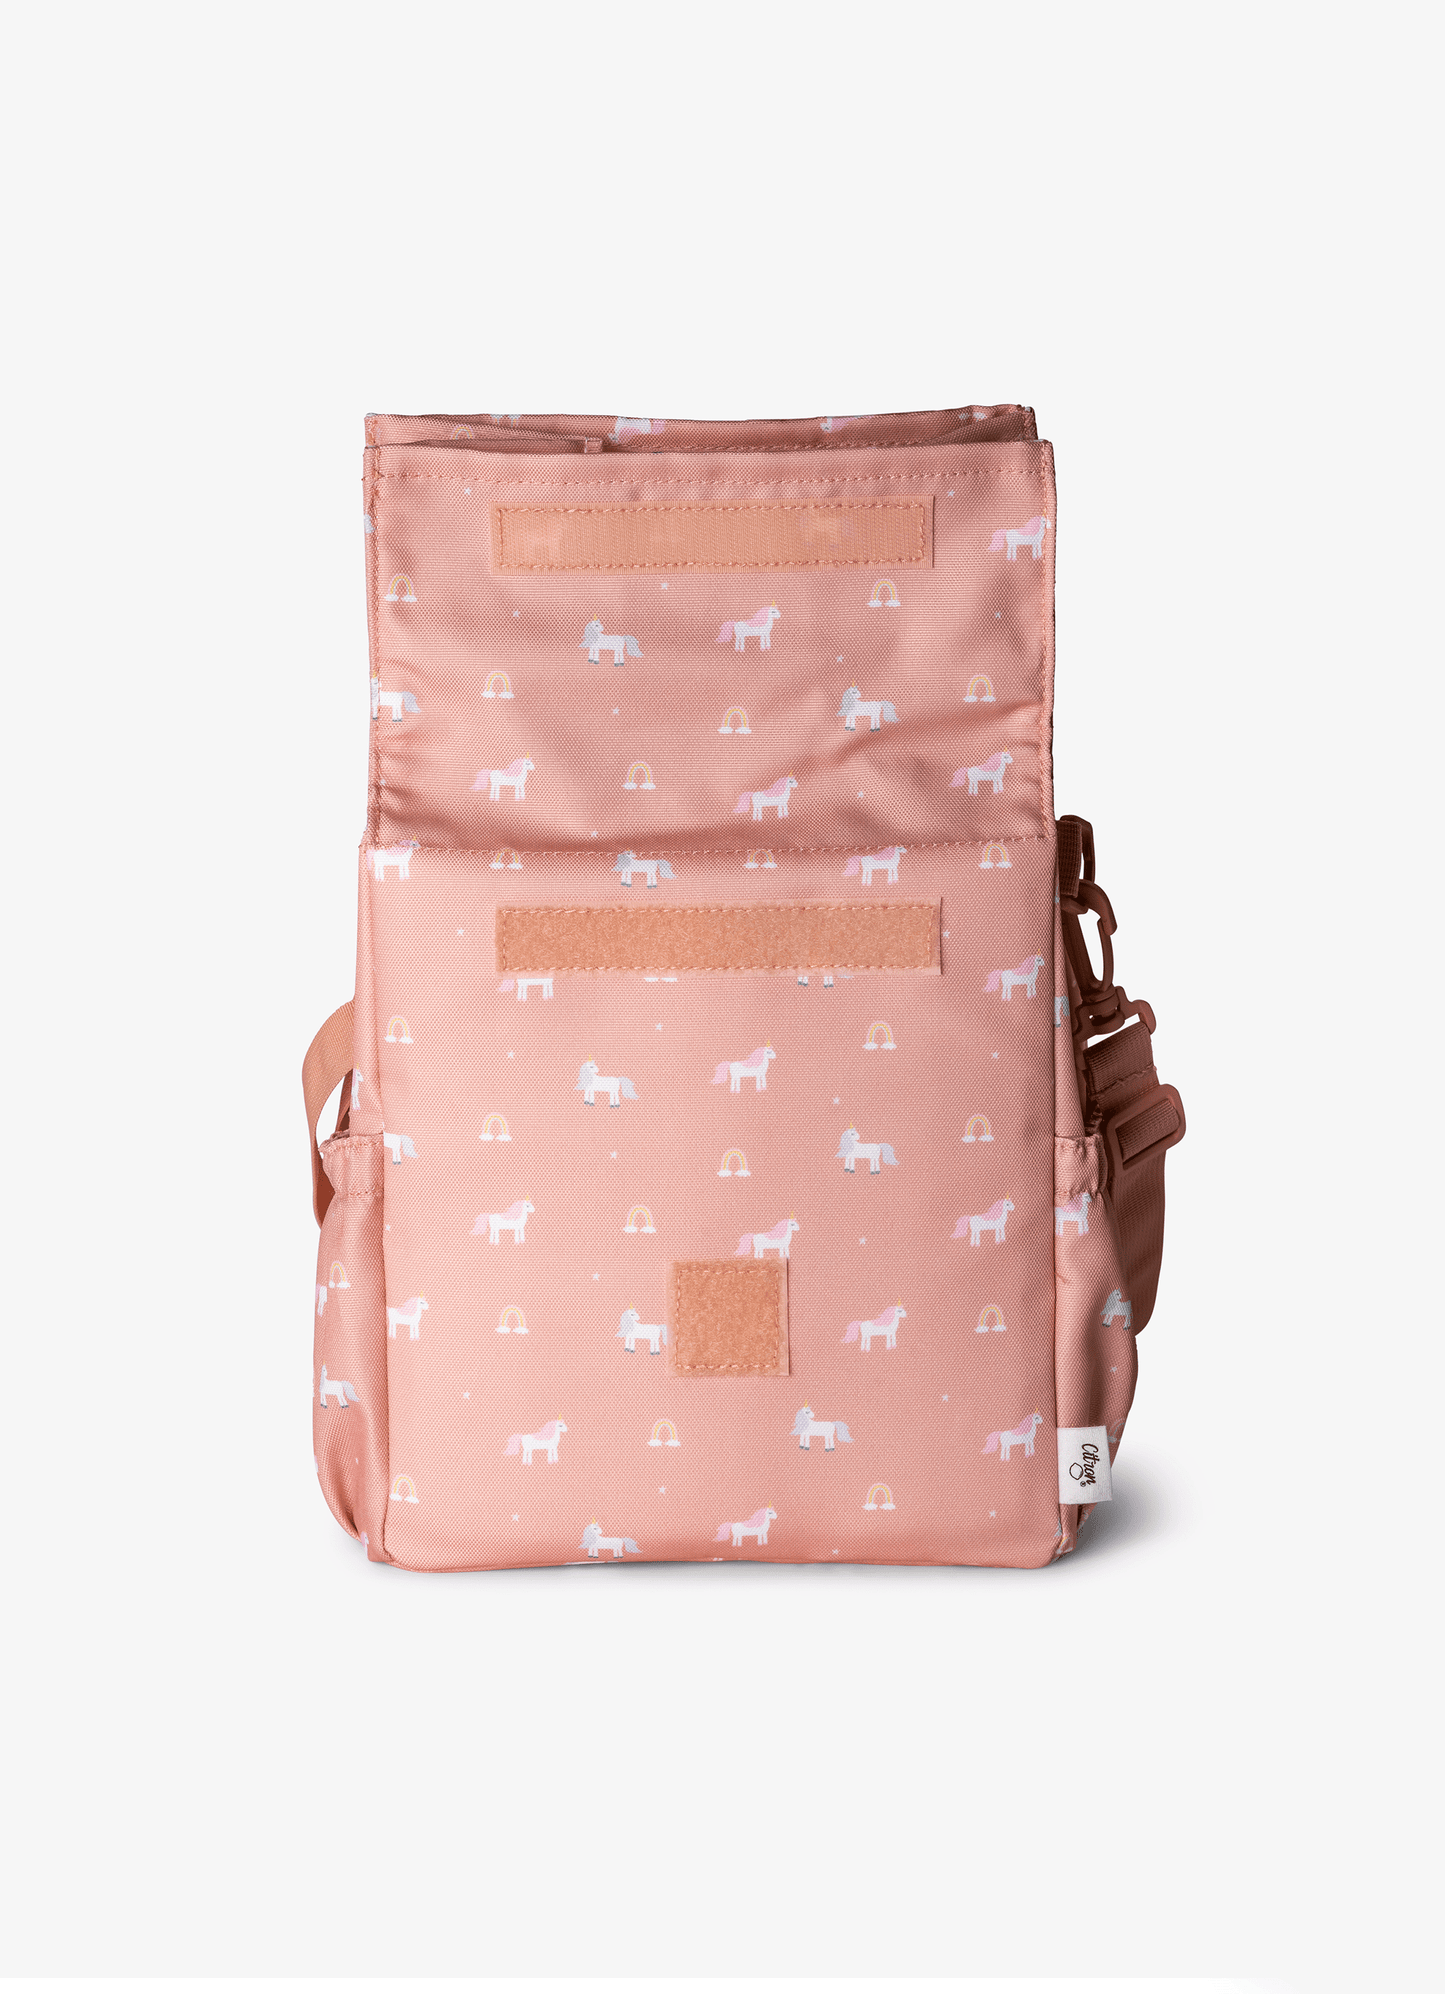 Insulated Roll-up Lunch Bag - Unicorn Blush pink